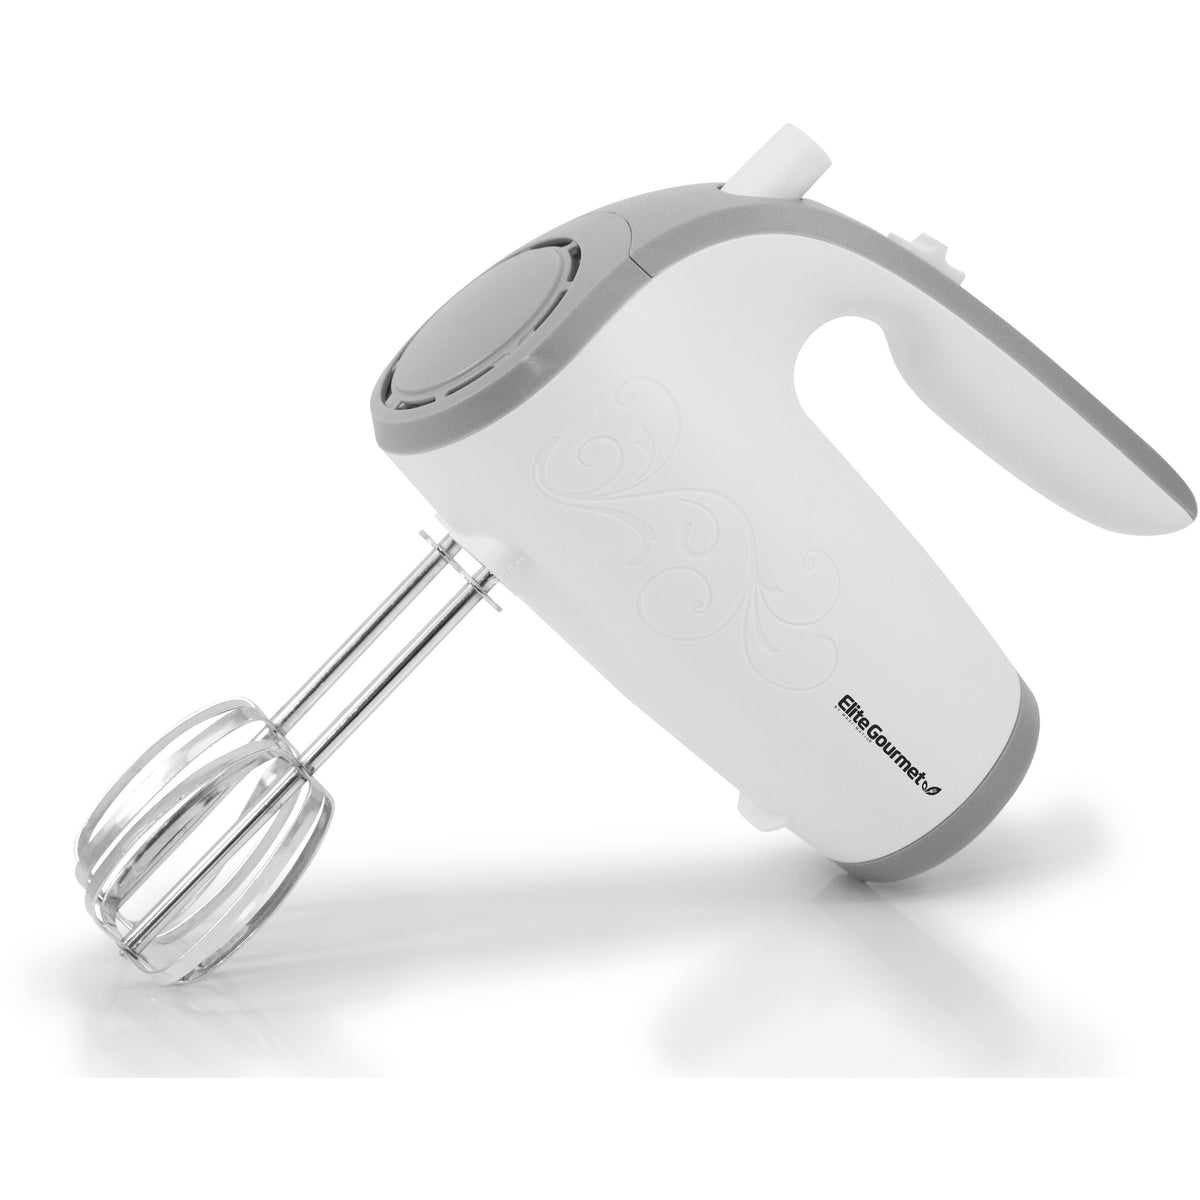 Eurostar 5-Speed Electric Hand Mixer with Stainless Steel Beaters - White